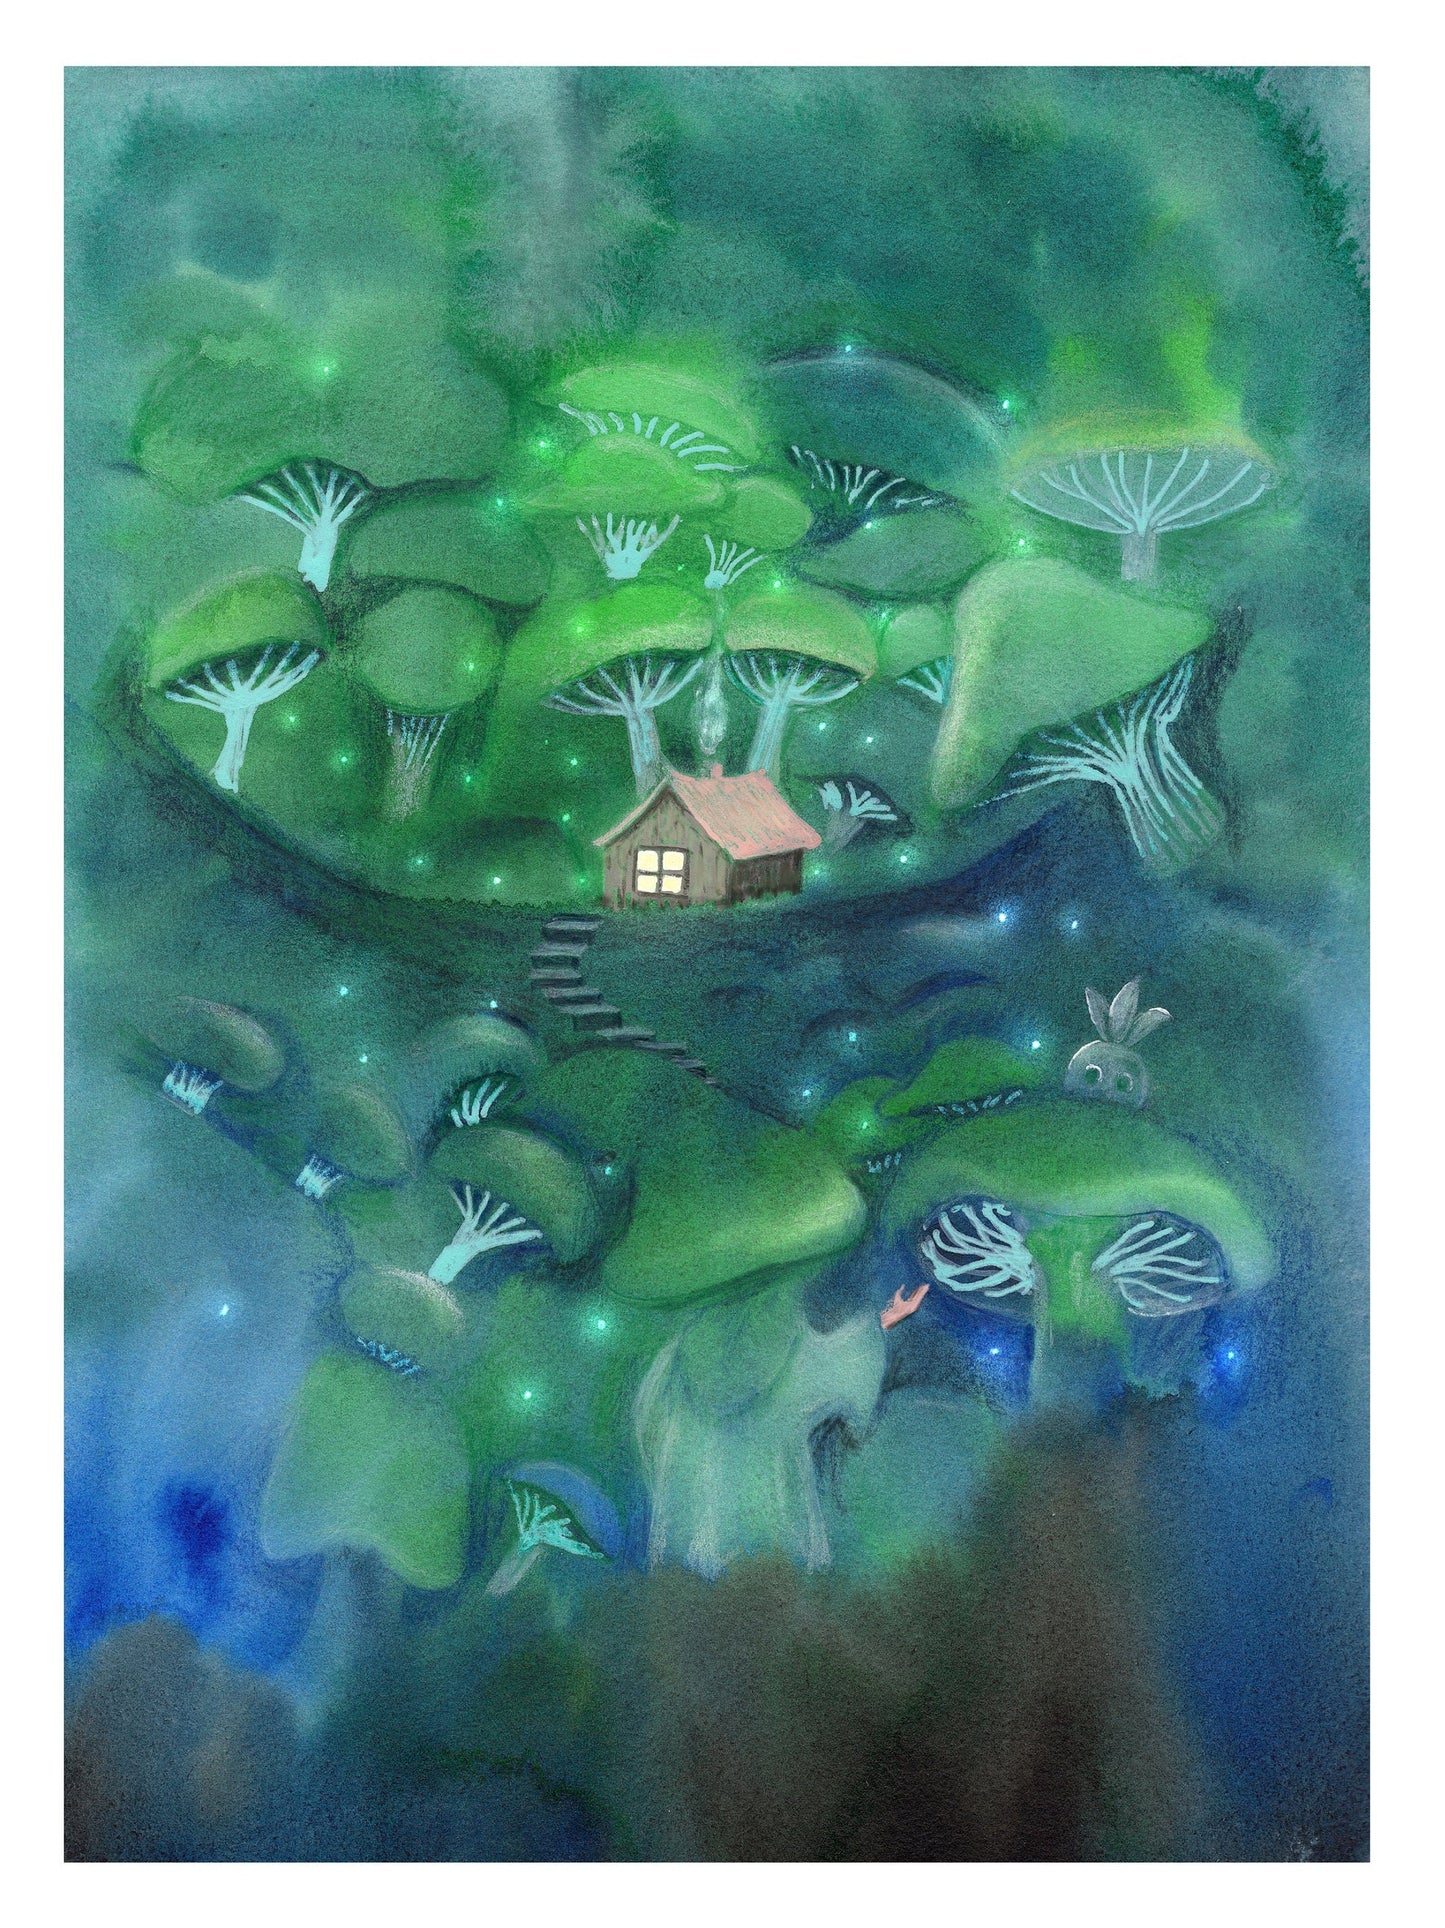 Mushroom Forest Witch| Art print on watercolor paper 32x27cm - hand signed and limited